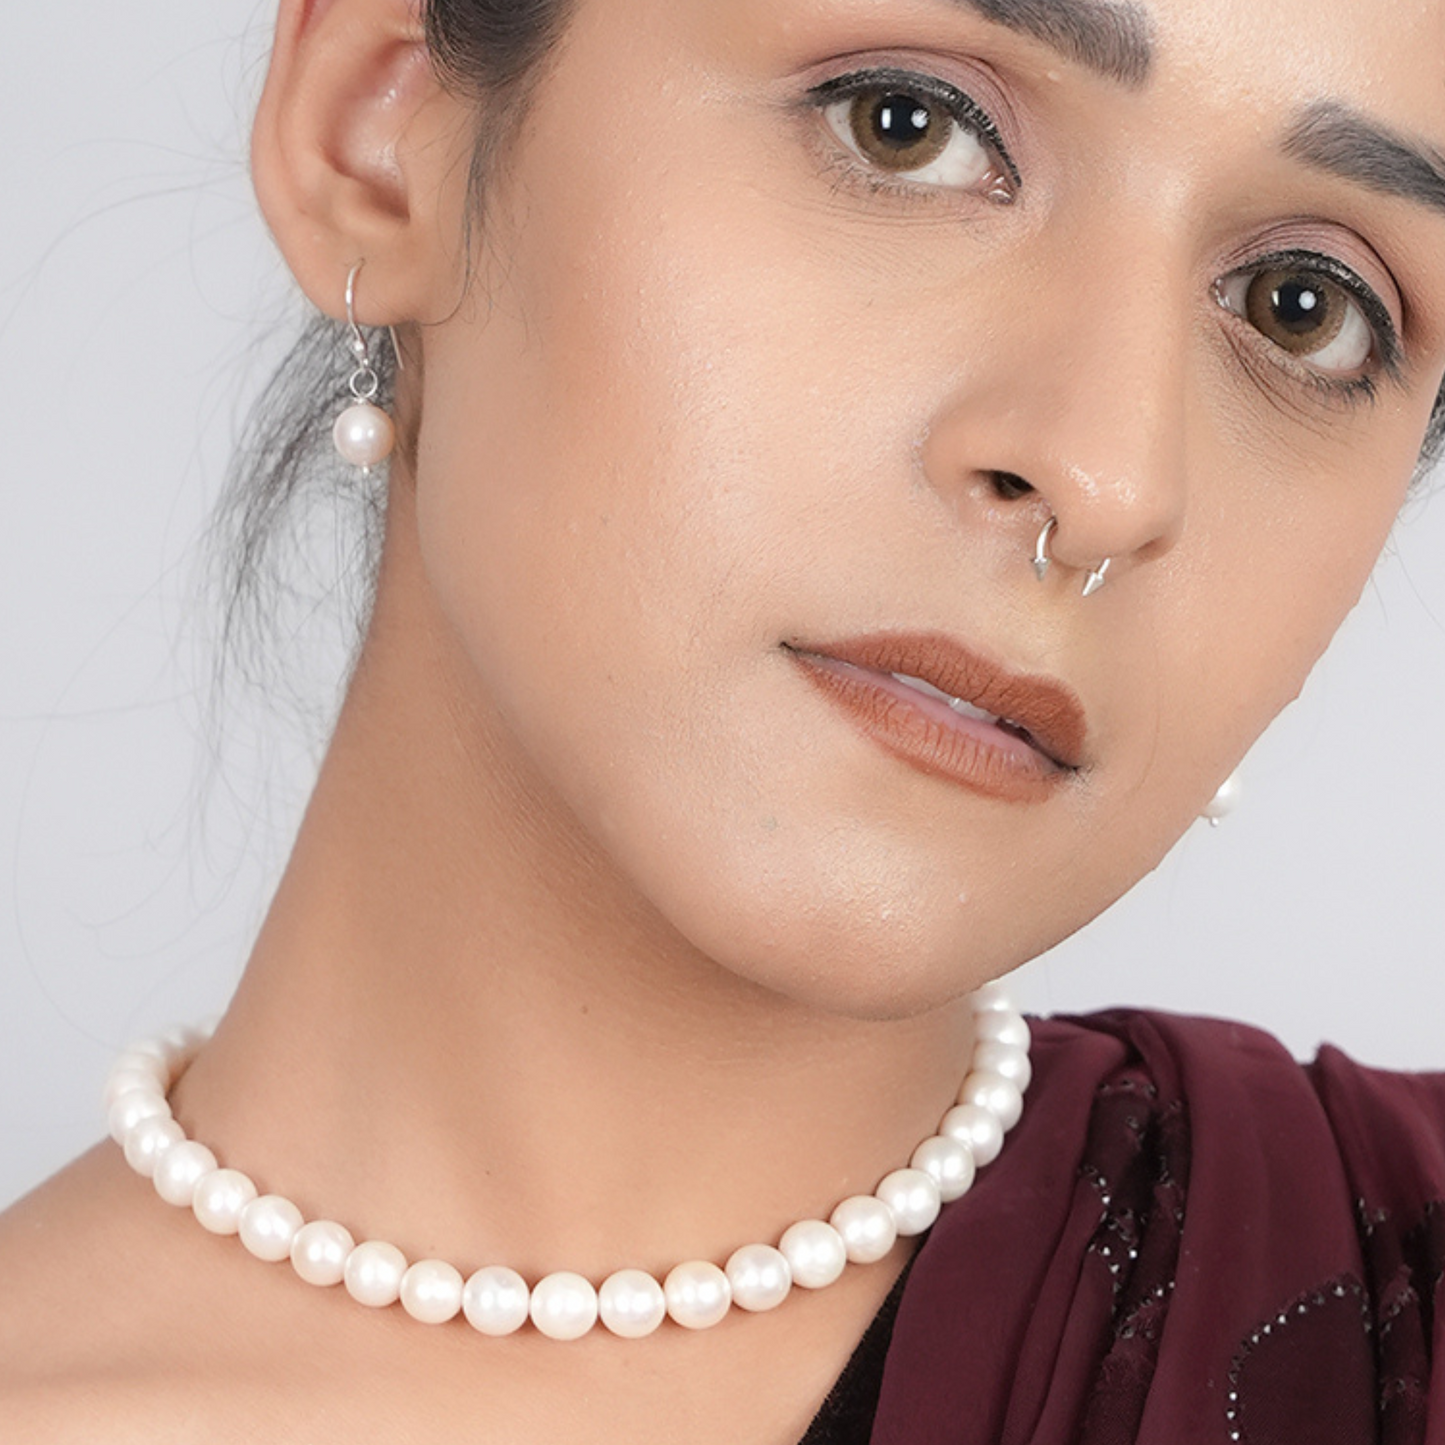 "Eleganza" 10mm Cultured Pearl Necklace and Earrings Set for Women in Silver